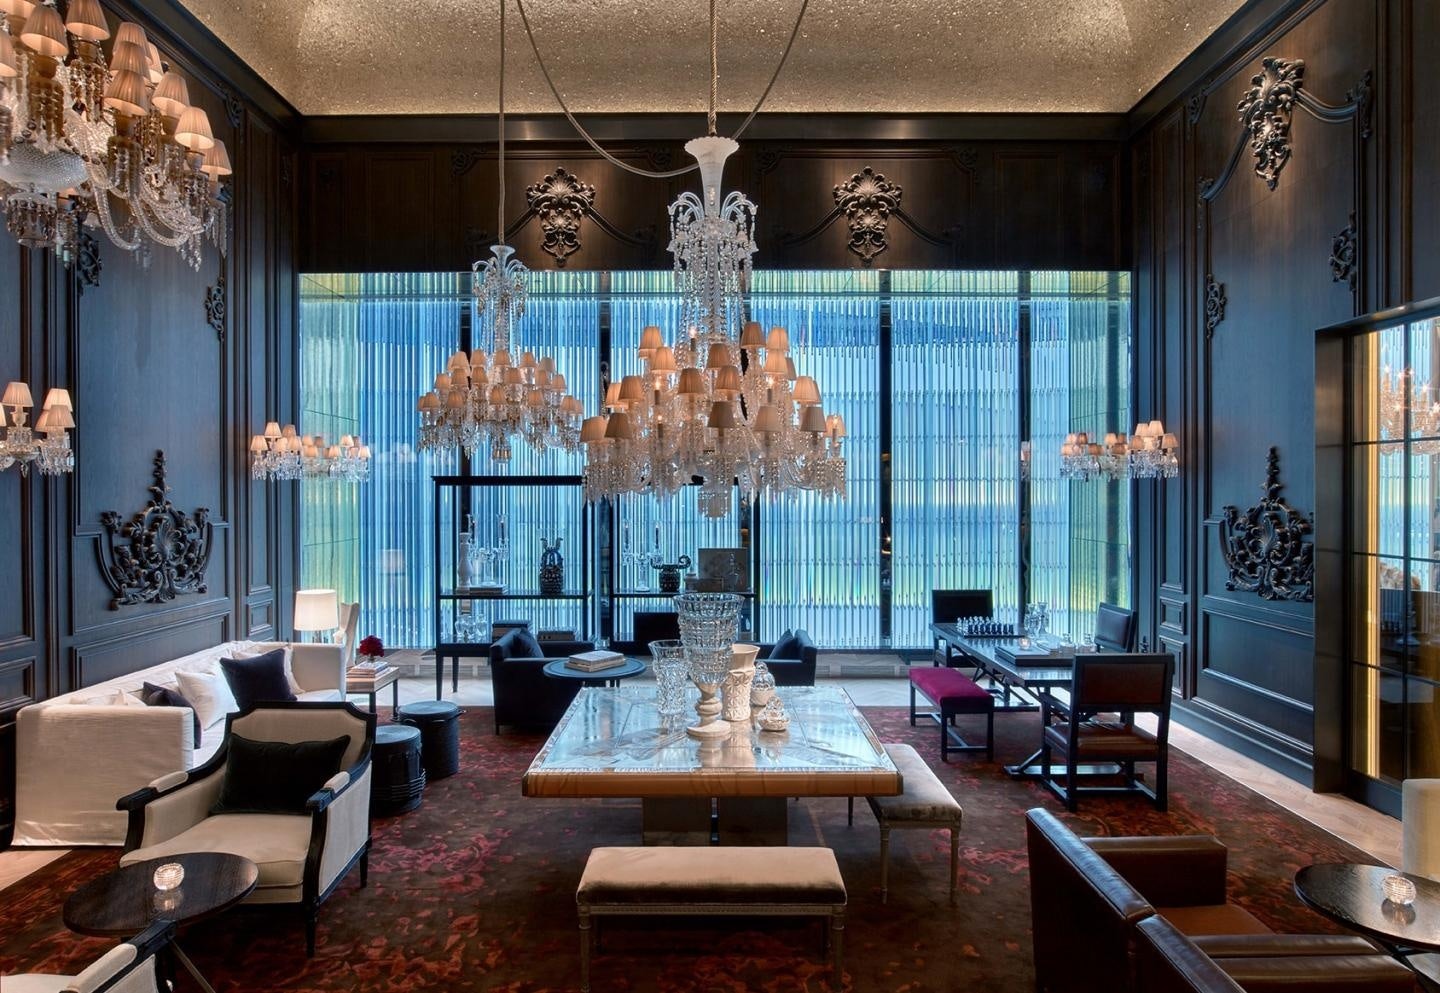 Baccarat Hotel New York's Petit Salon is full of the crystal company's products. (Courtesy Photo)